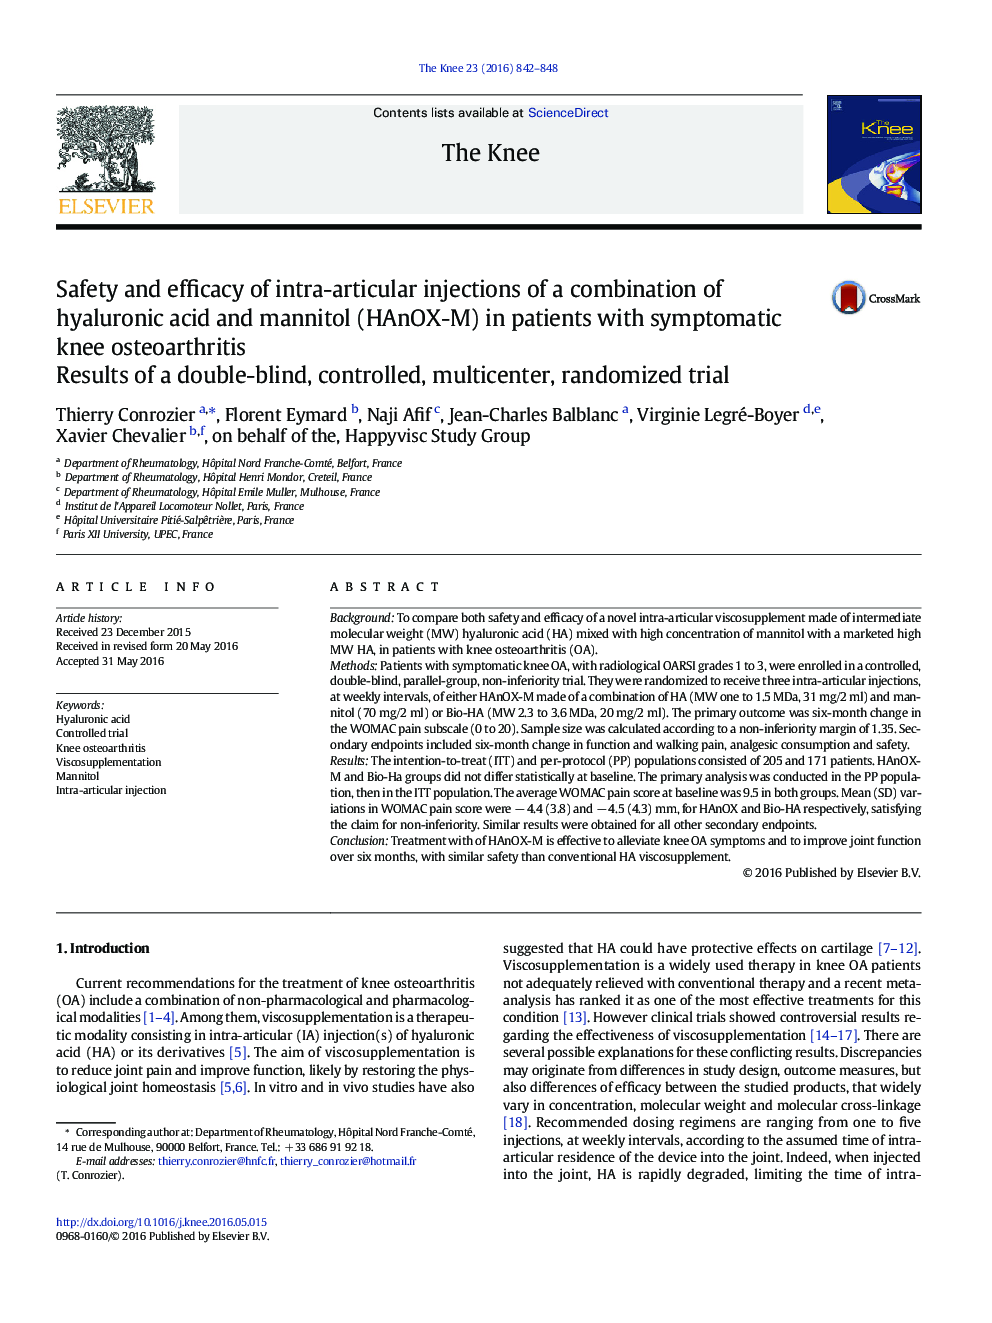 Safety and efficacy of intra-articular injections of a combination of hyaluronic acid and mannitol (HAnOX-M) in patients with symptomatic knee osteoarthritis: Results of a double-blind, controlled, multicenter, randomized trial